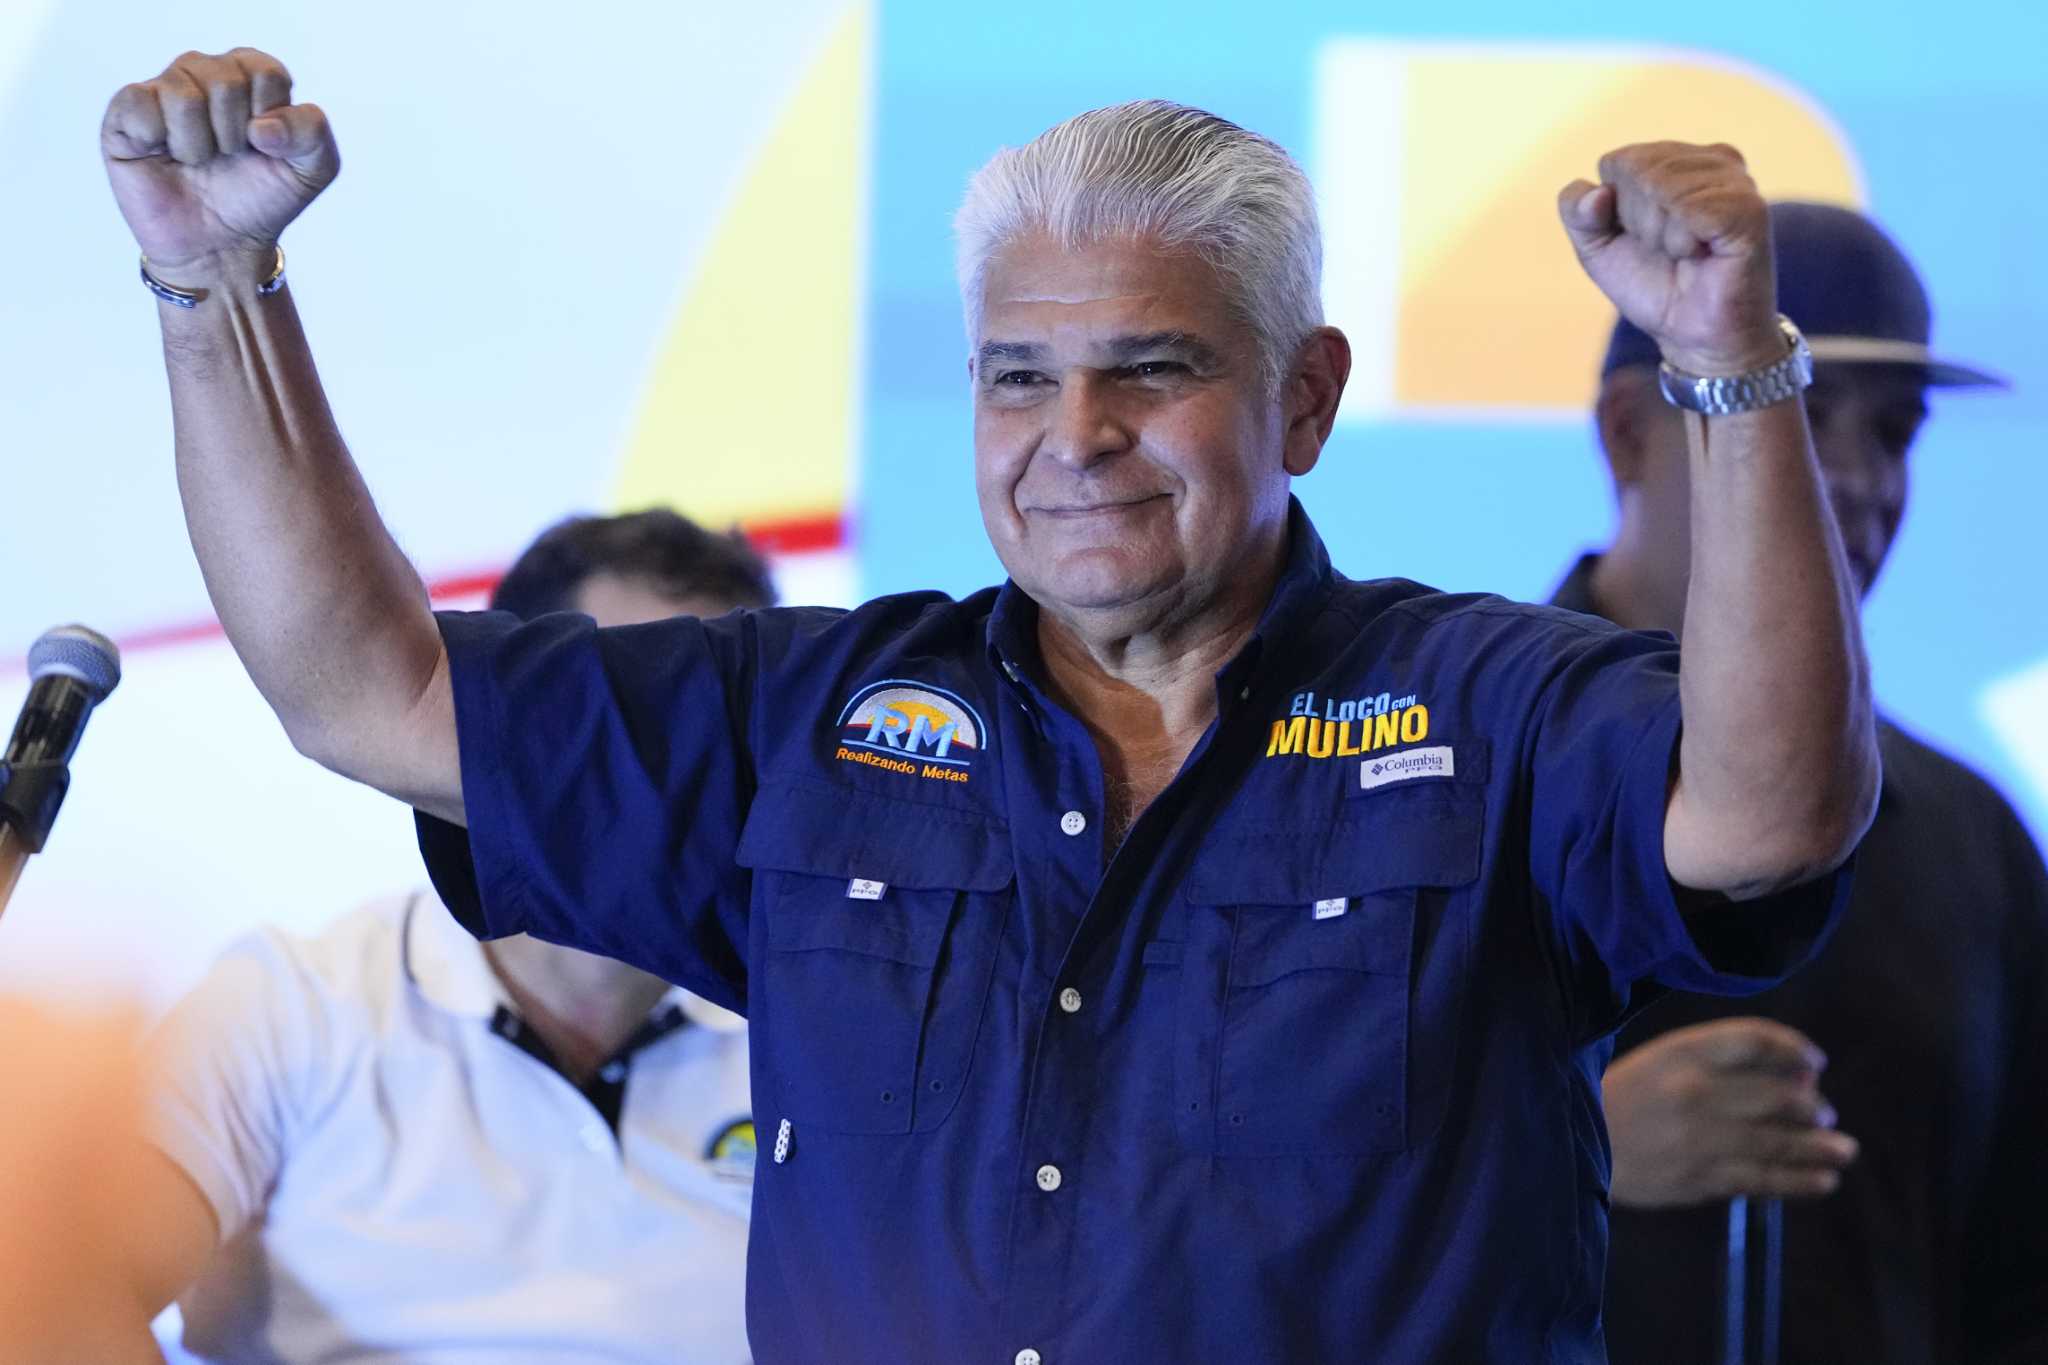 Panama's new president-elect, José Raúl Mulino, was a late entry in the race